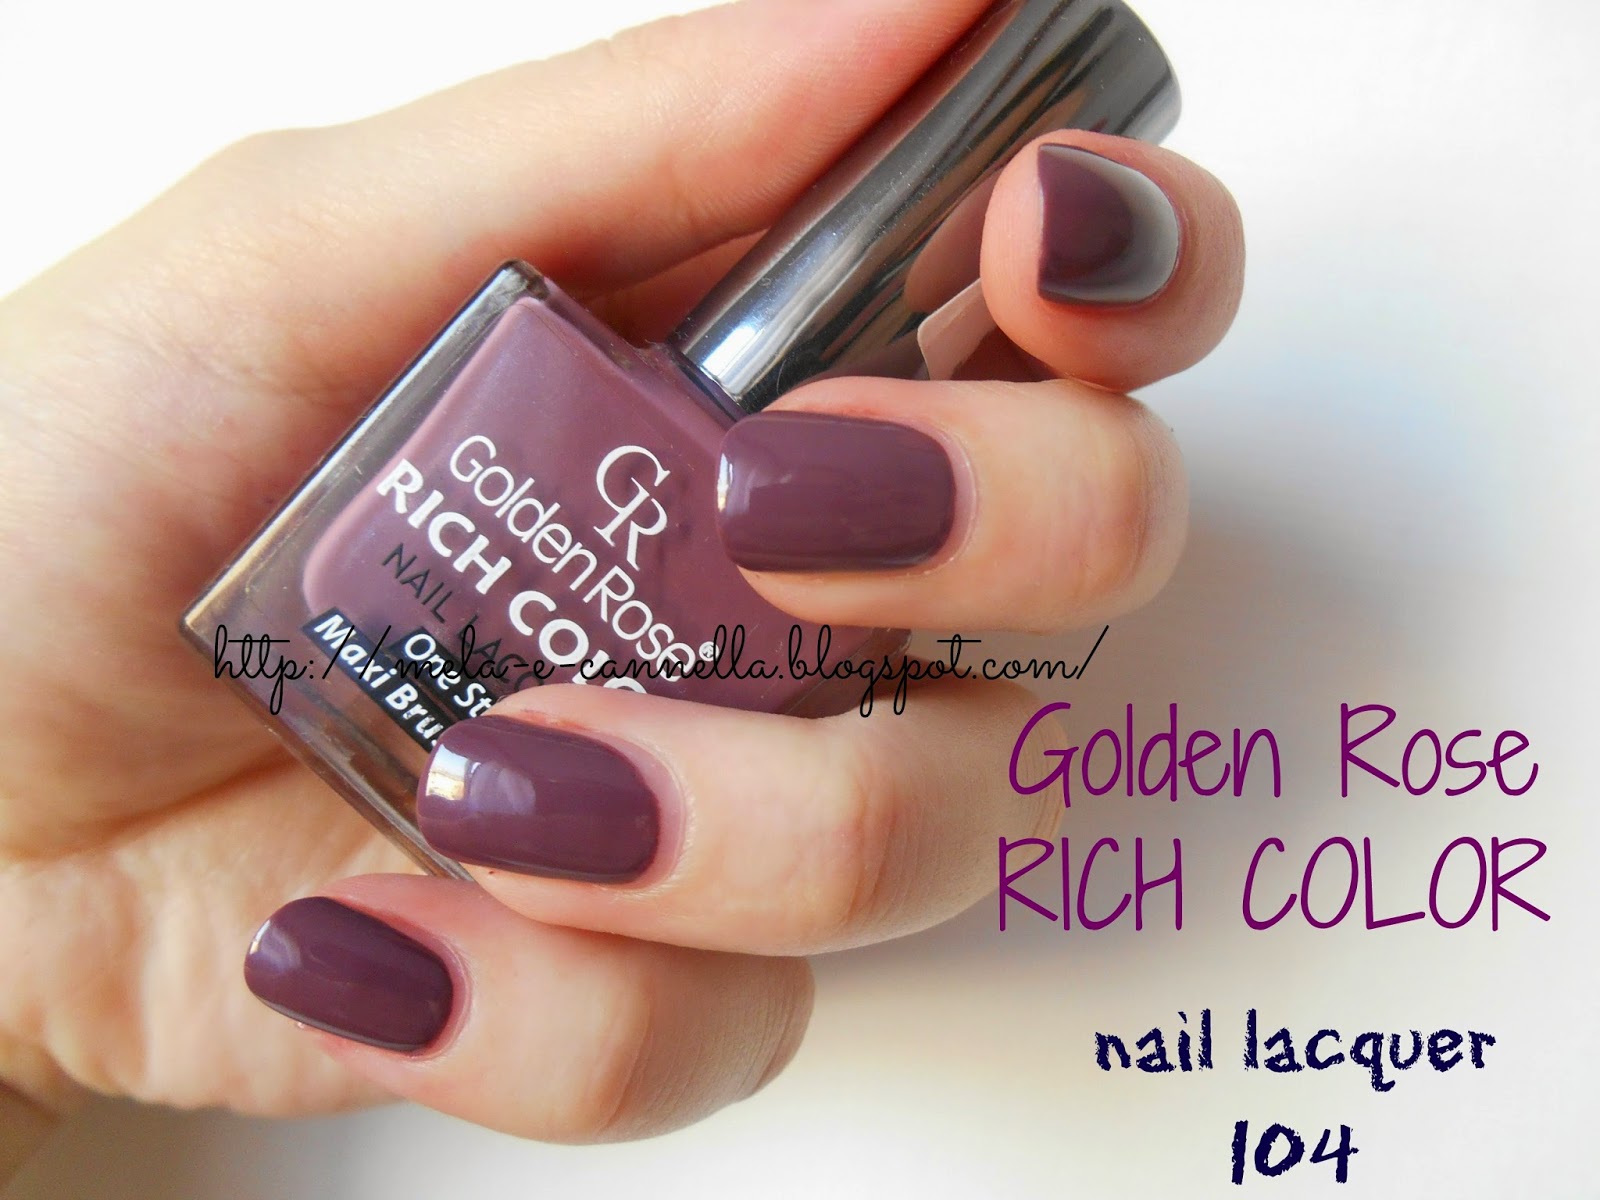 3. OPI Nail Lacquer - Rose Gold - wide 8